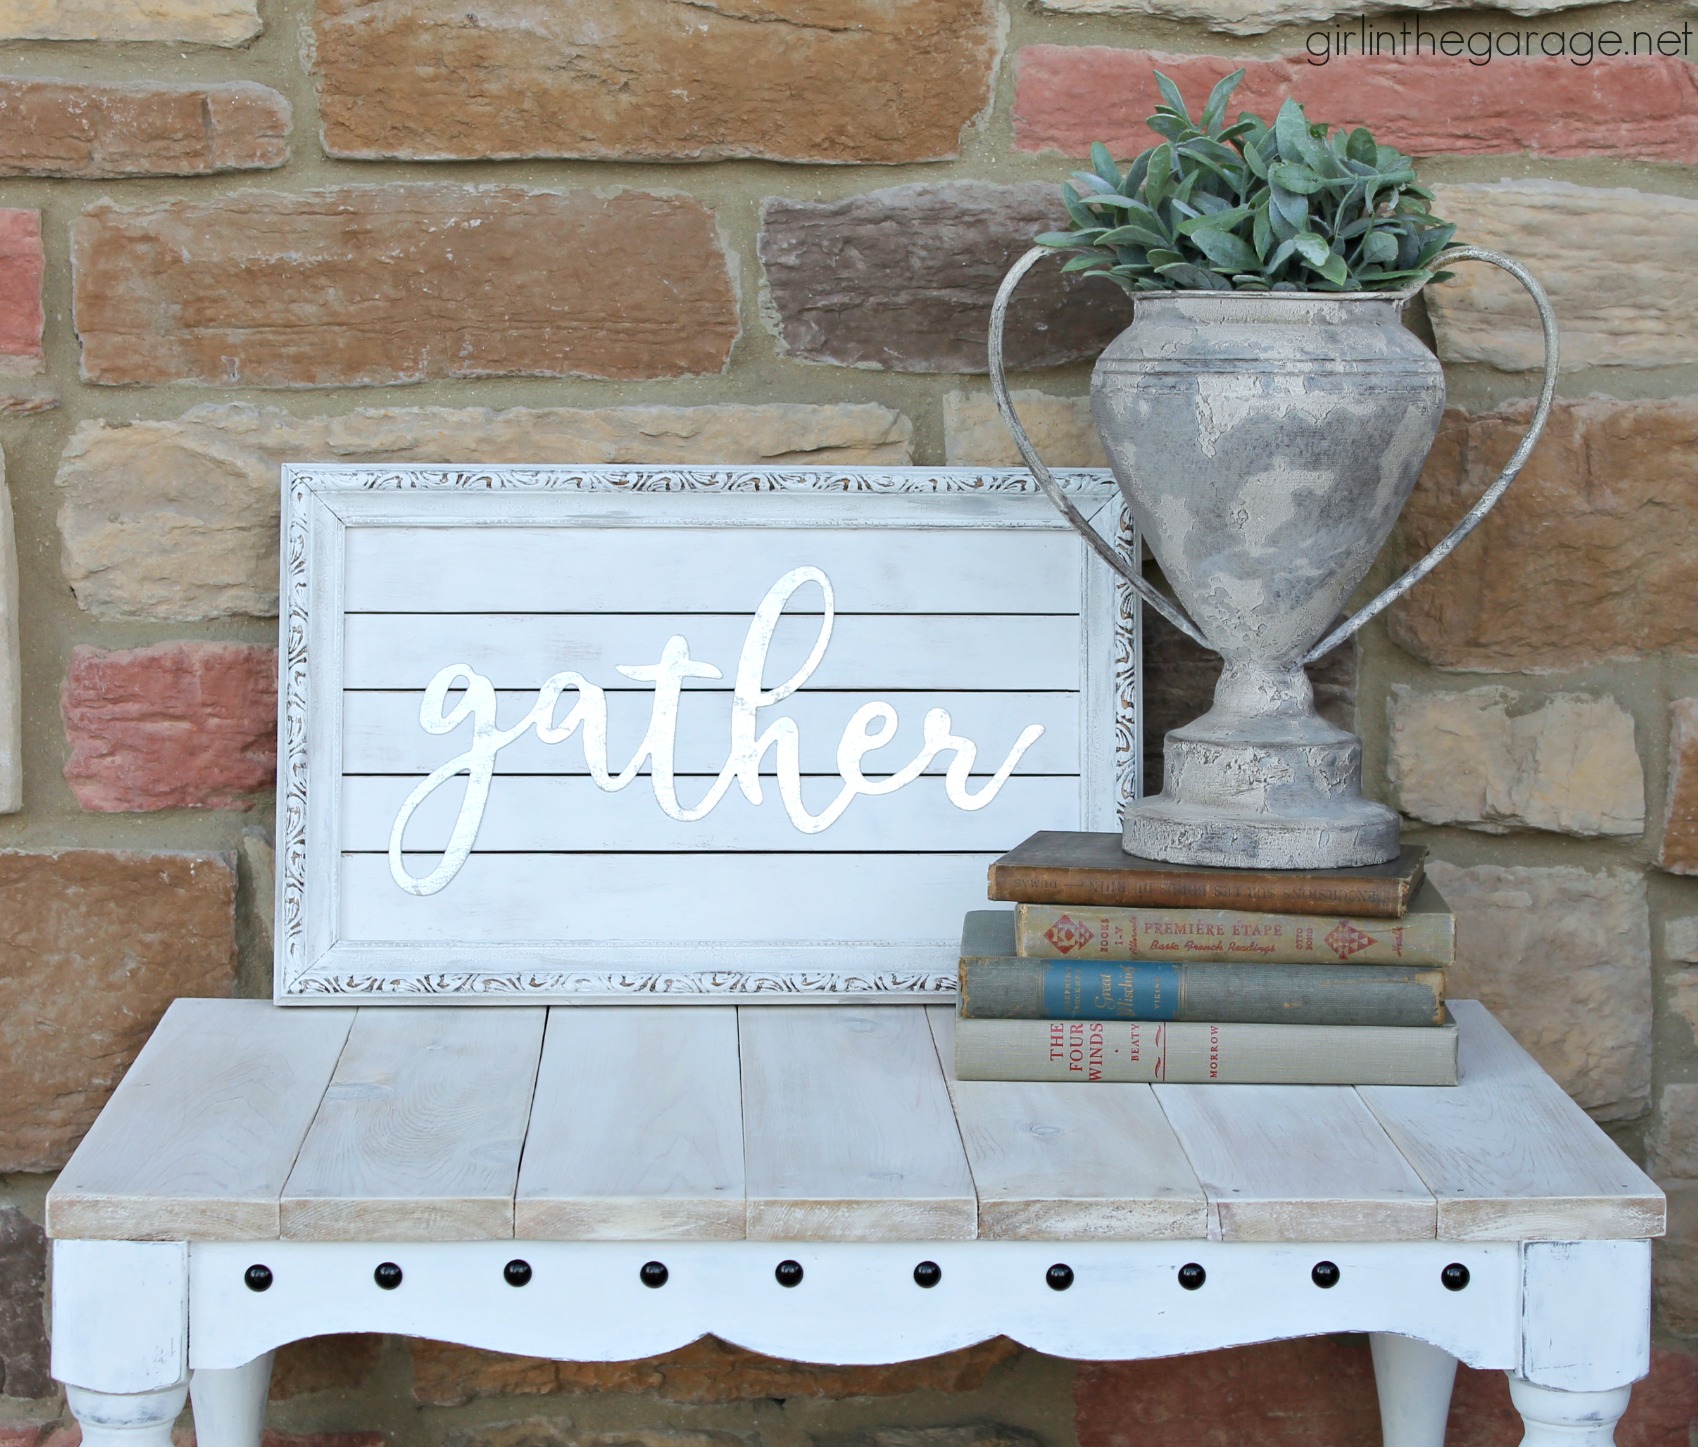 Thrifted art makeover repurposed into a planked farmhouse Gather sign. Easy DIY home decor tutorial by Girl in the Garage.